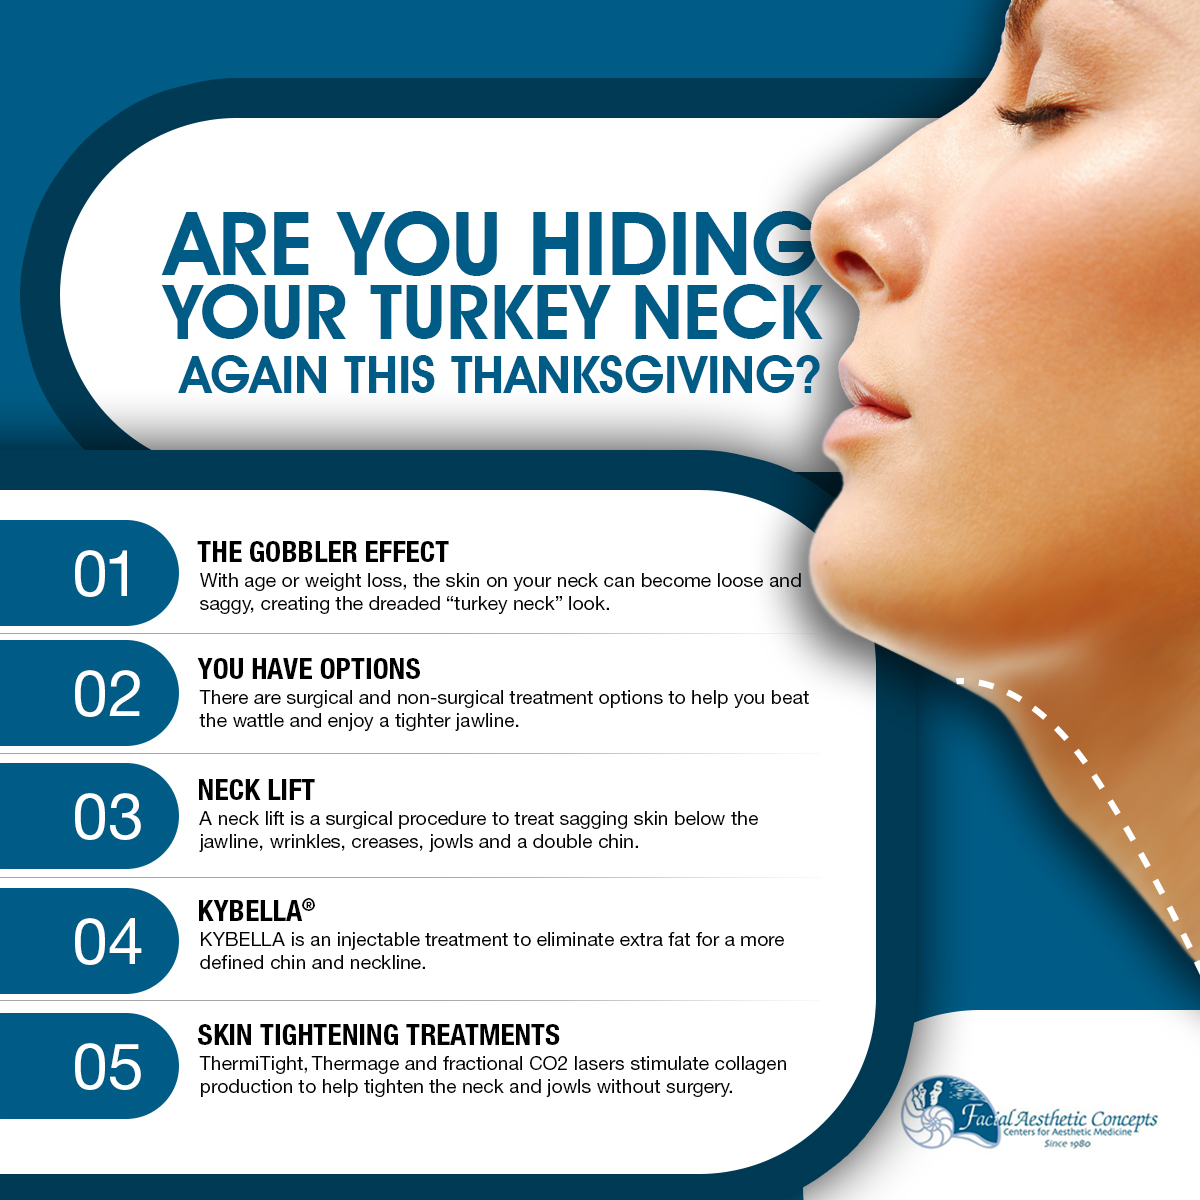 Are You Hiding Your Turkey Neck Again This Thanksgiving? [Infographic] img 1